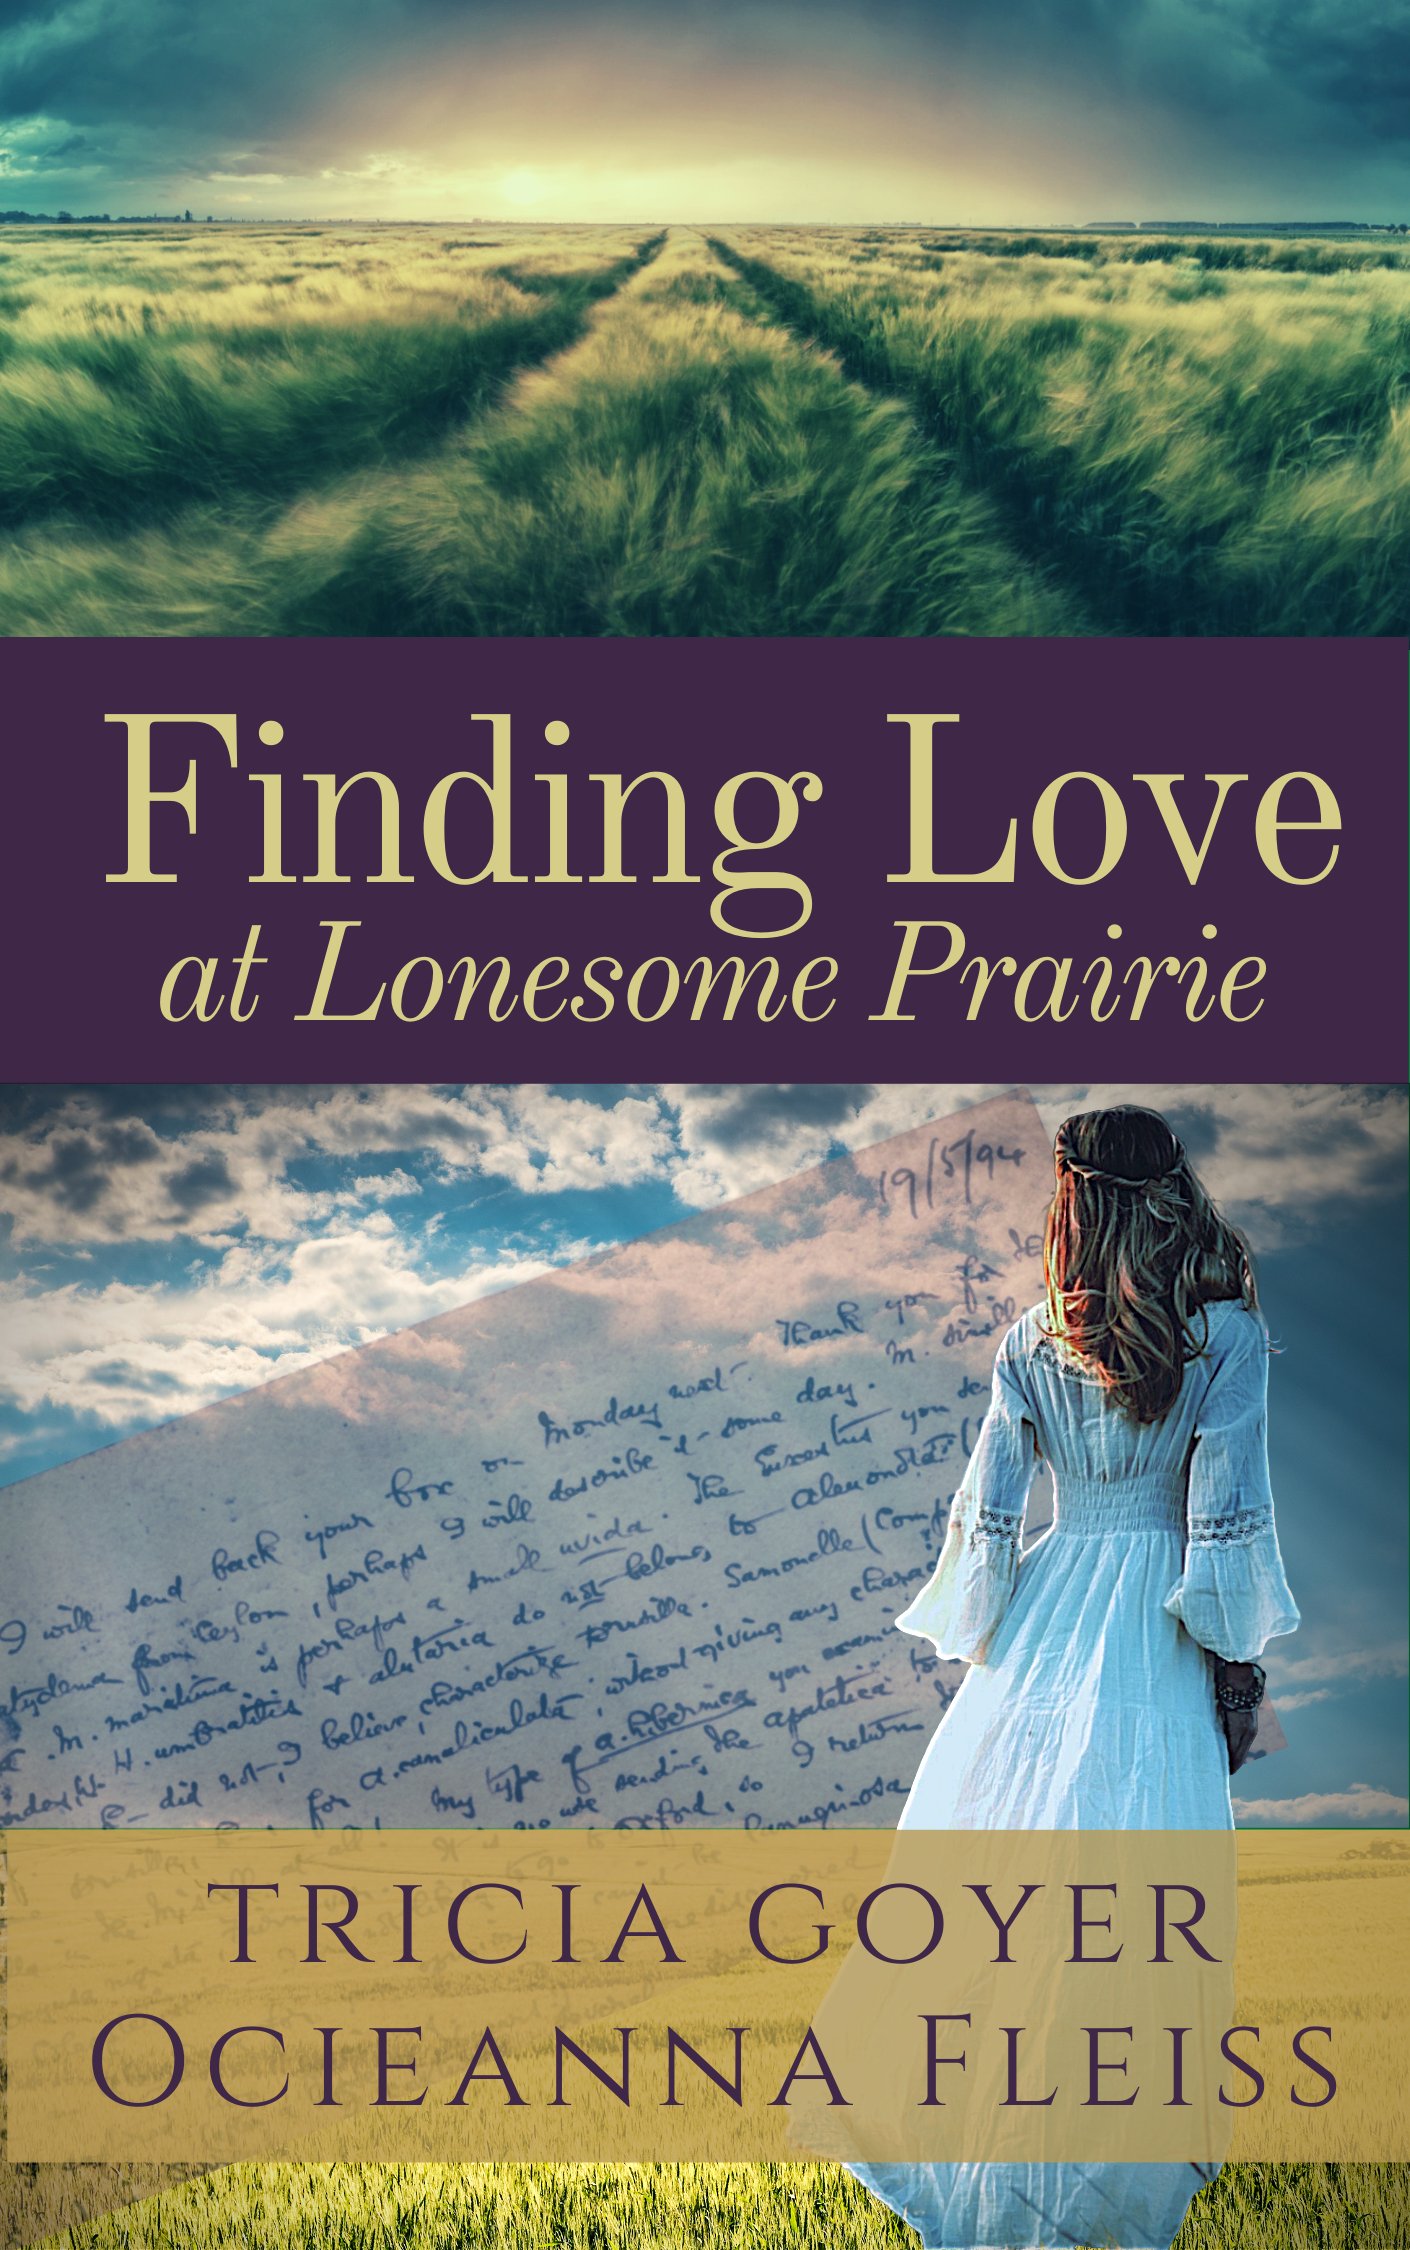 Finding Love in Lonesome Prairie